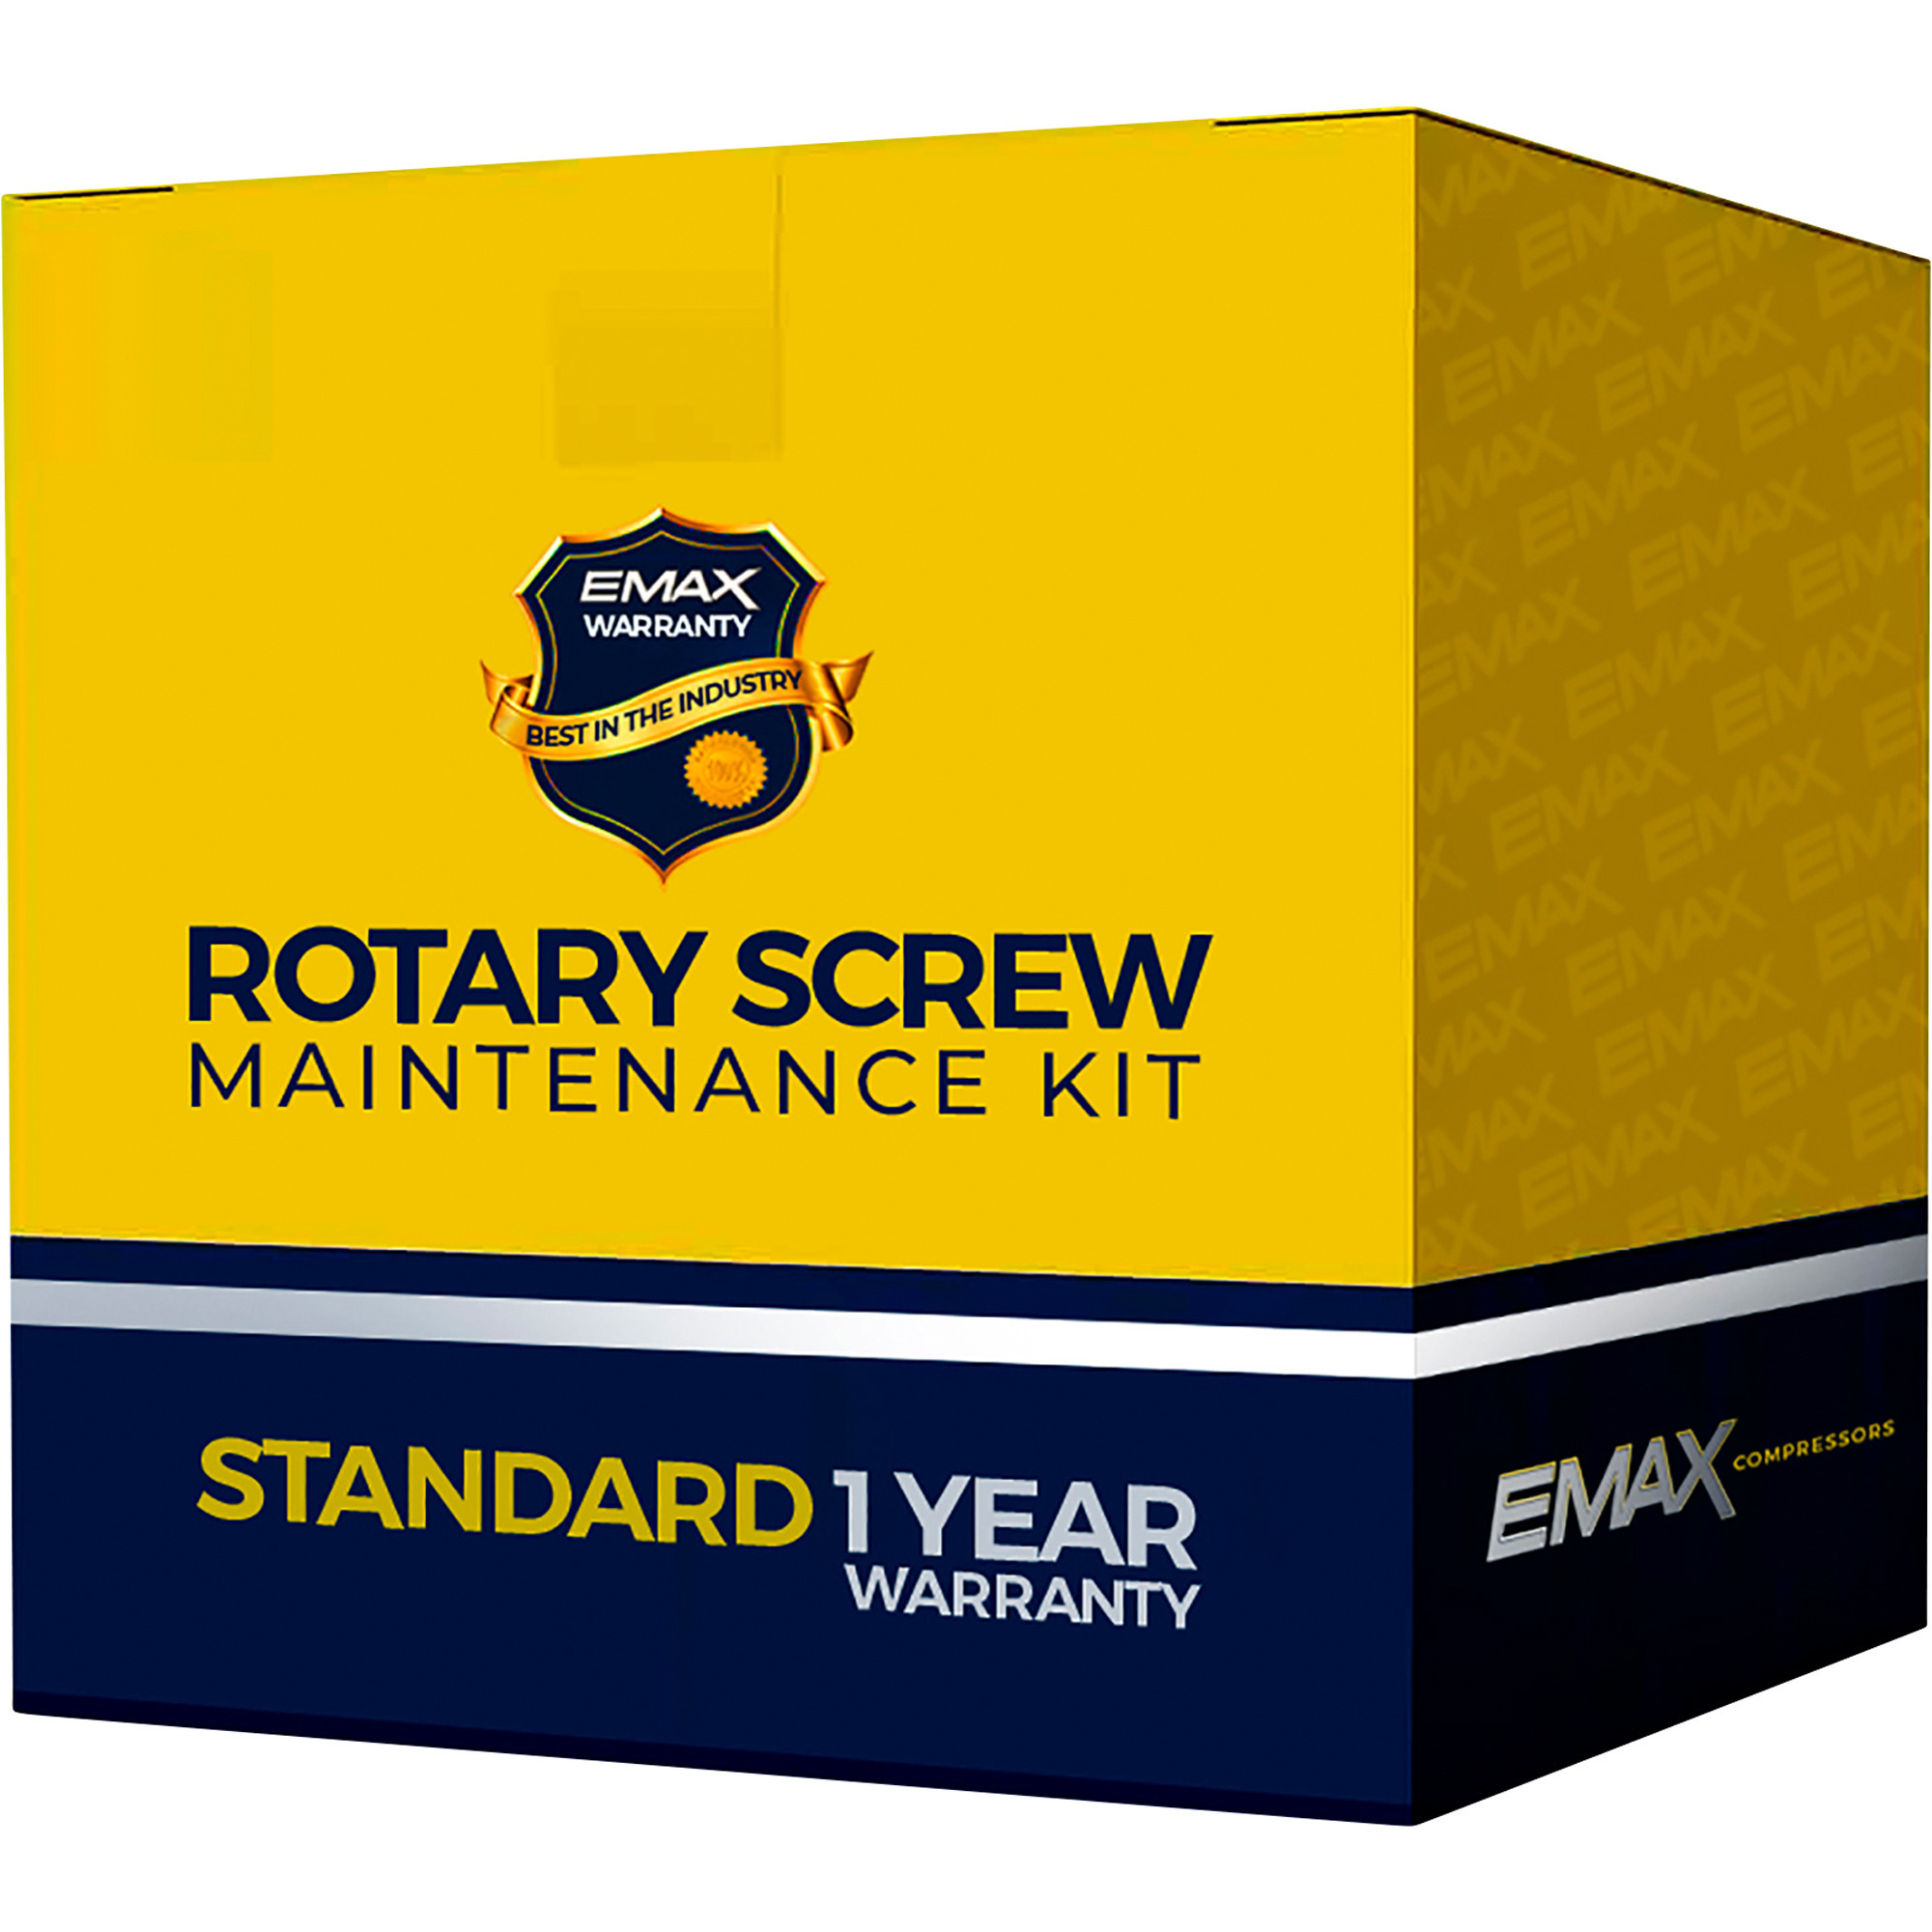 EMAX Warranty Service Kit, For 5-10 HP (T) Rotary Screw Compressor, Model SKIT001A